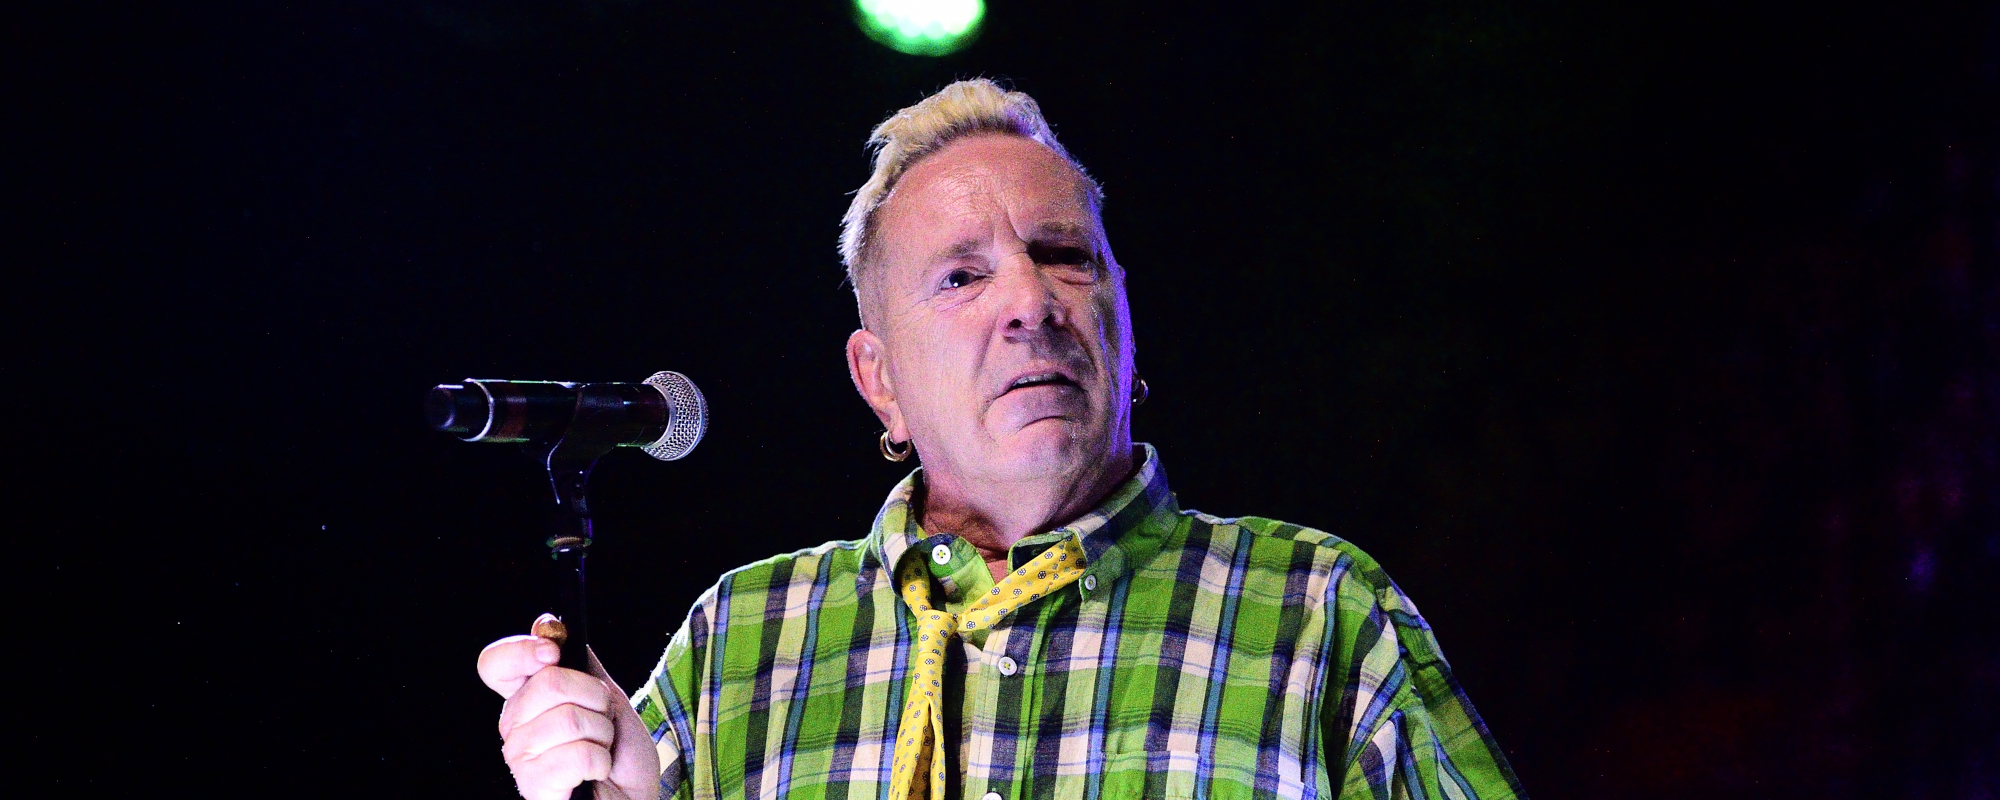 The Writer’s Block: John Lydon Leans on “Organized Confusion” for Songs